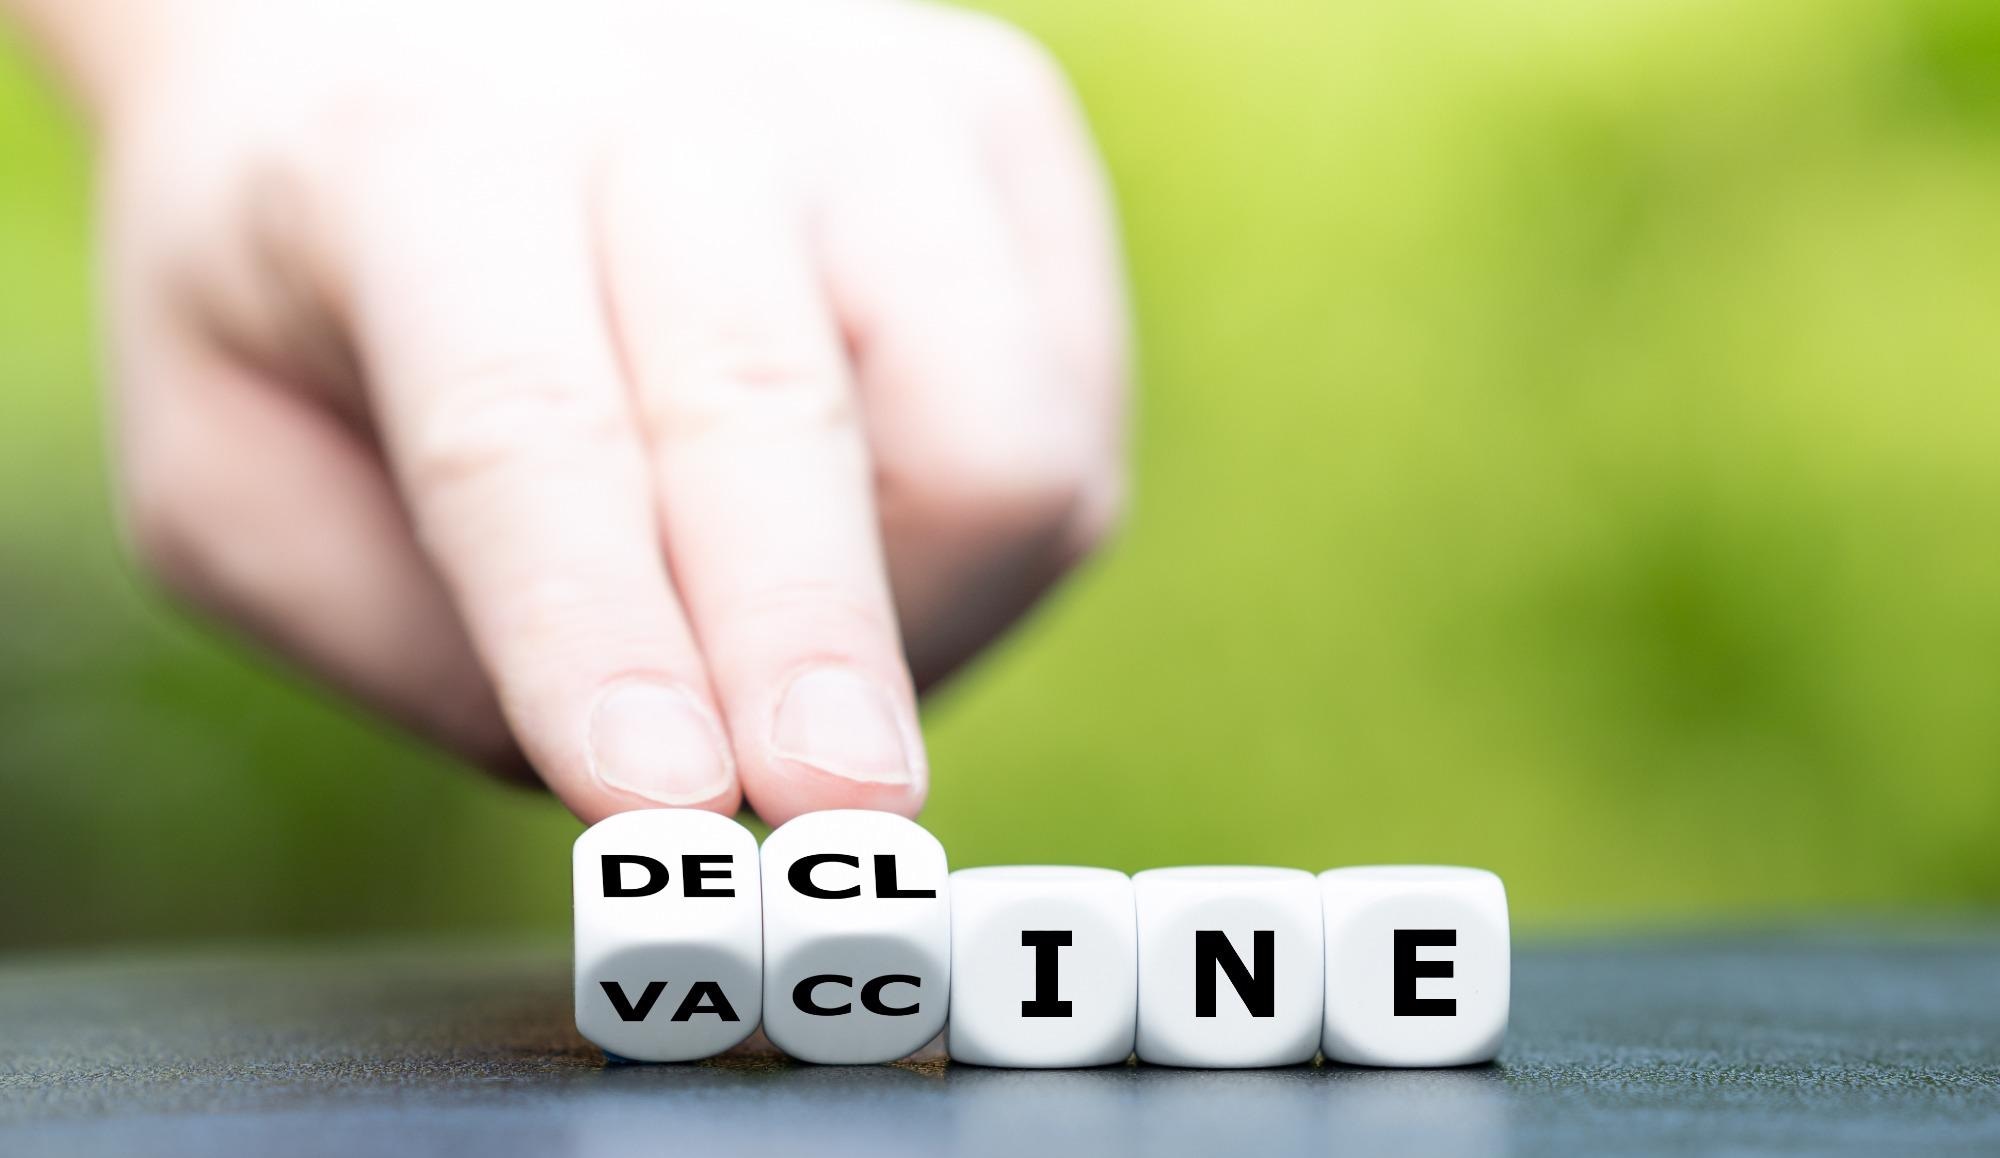 Study: Serious underlying medical conditions and COVID-19 vaccine hesitancy. Image Credit: FrankHH / Shutterstock